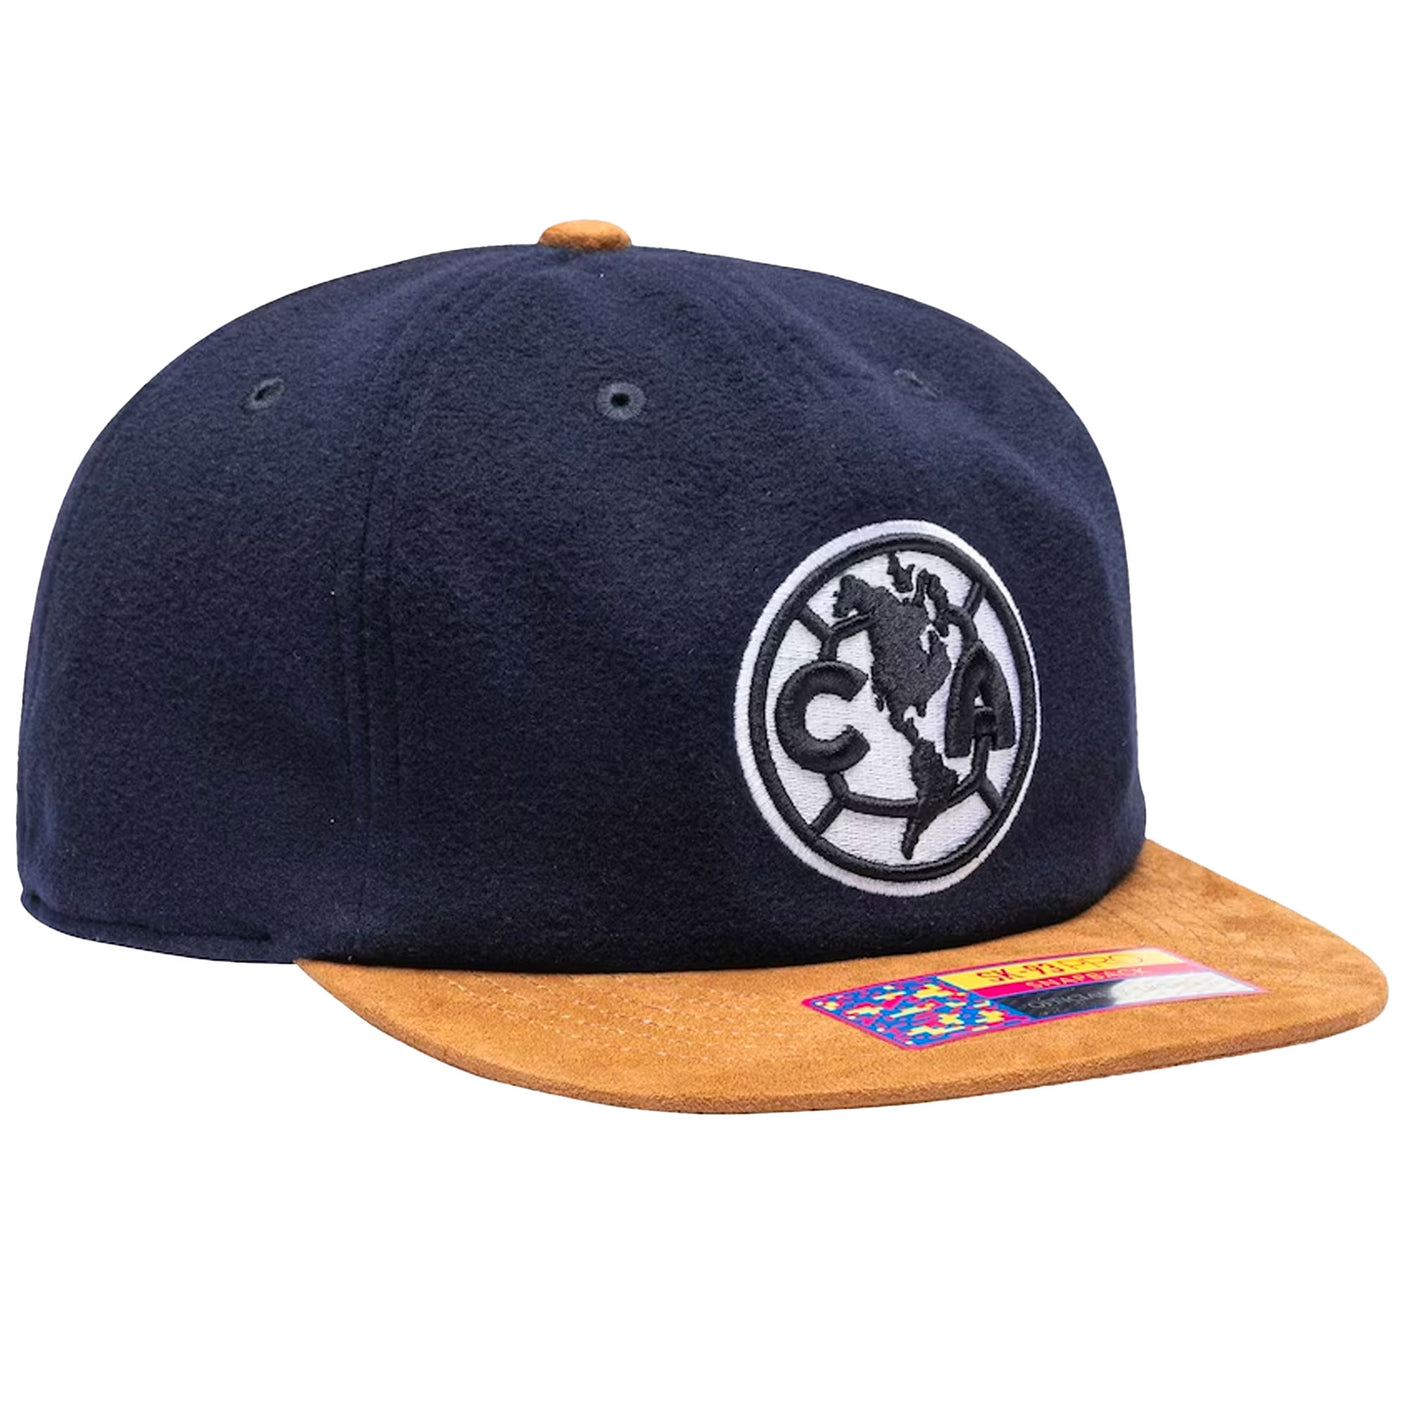 Fan Ink Club America Snap Back Hat Navy/Brown Right